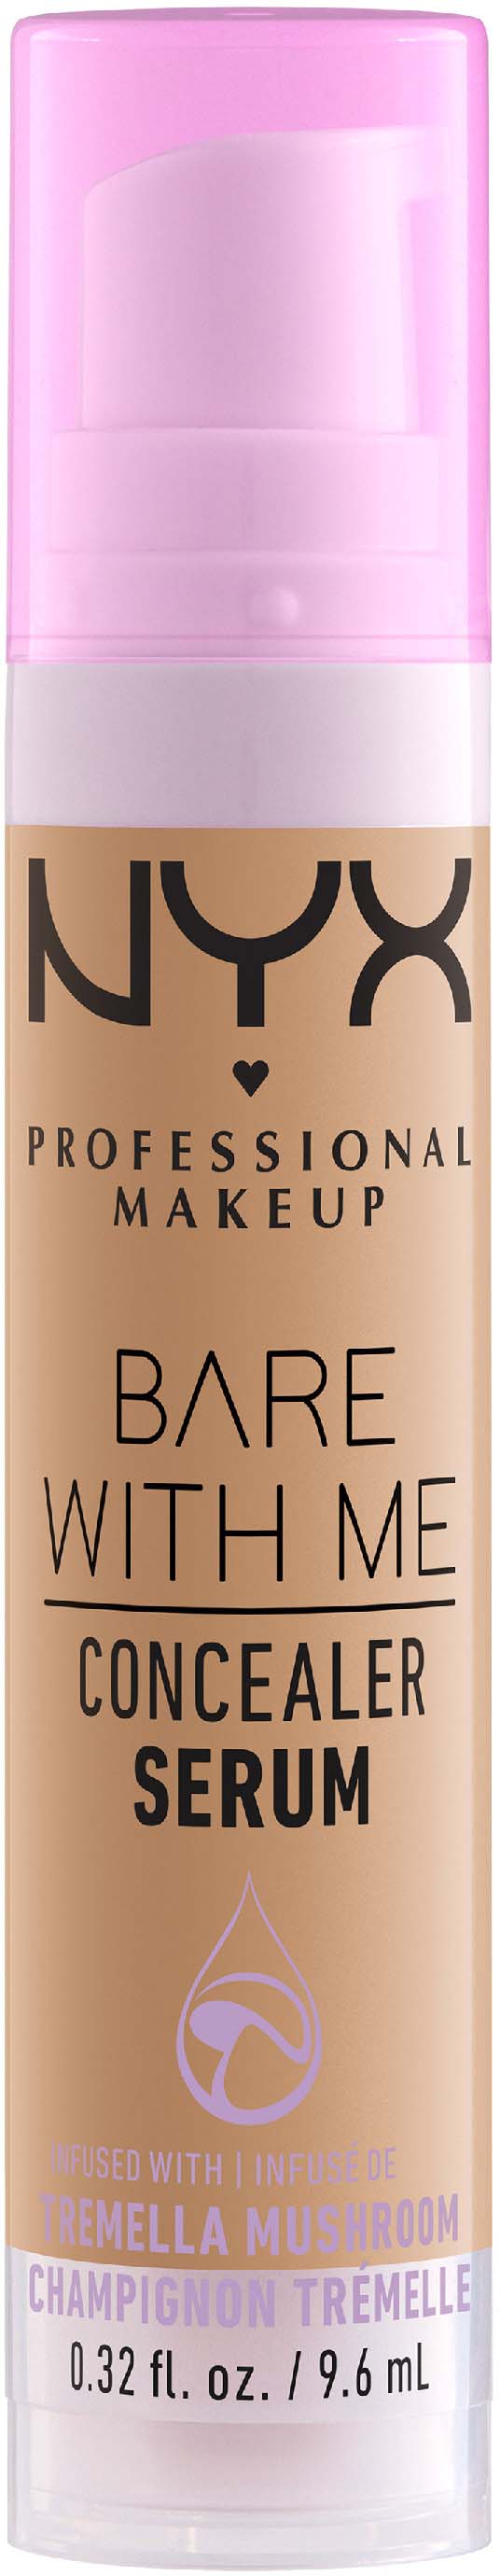 NYX PROFESSIONAL MAKEUP Bare With Me Concealer Serum Beige